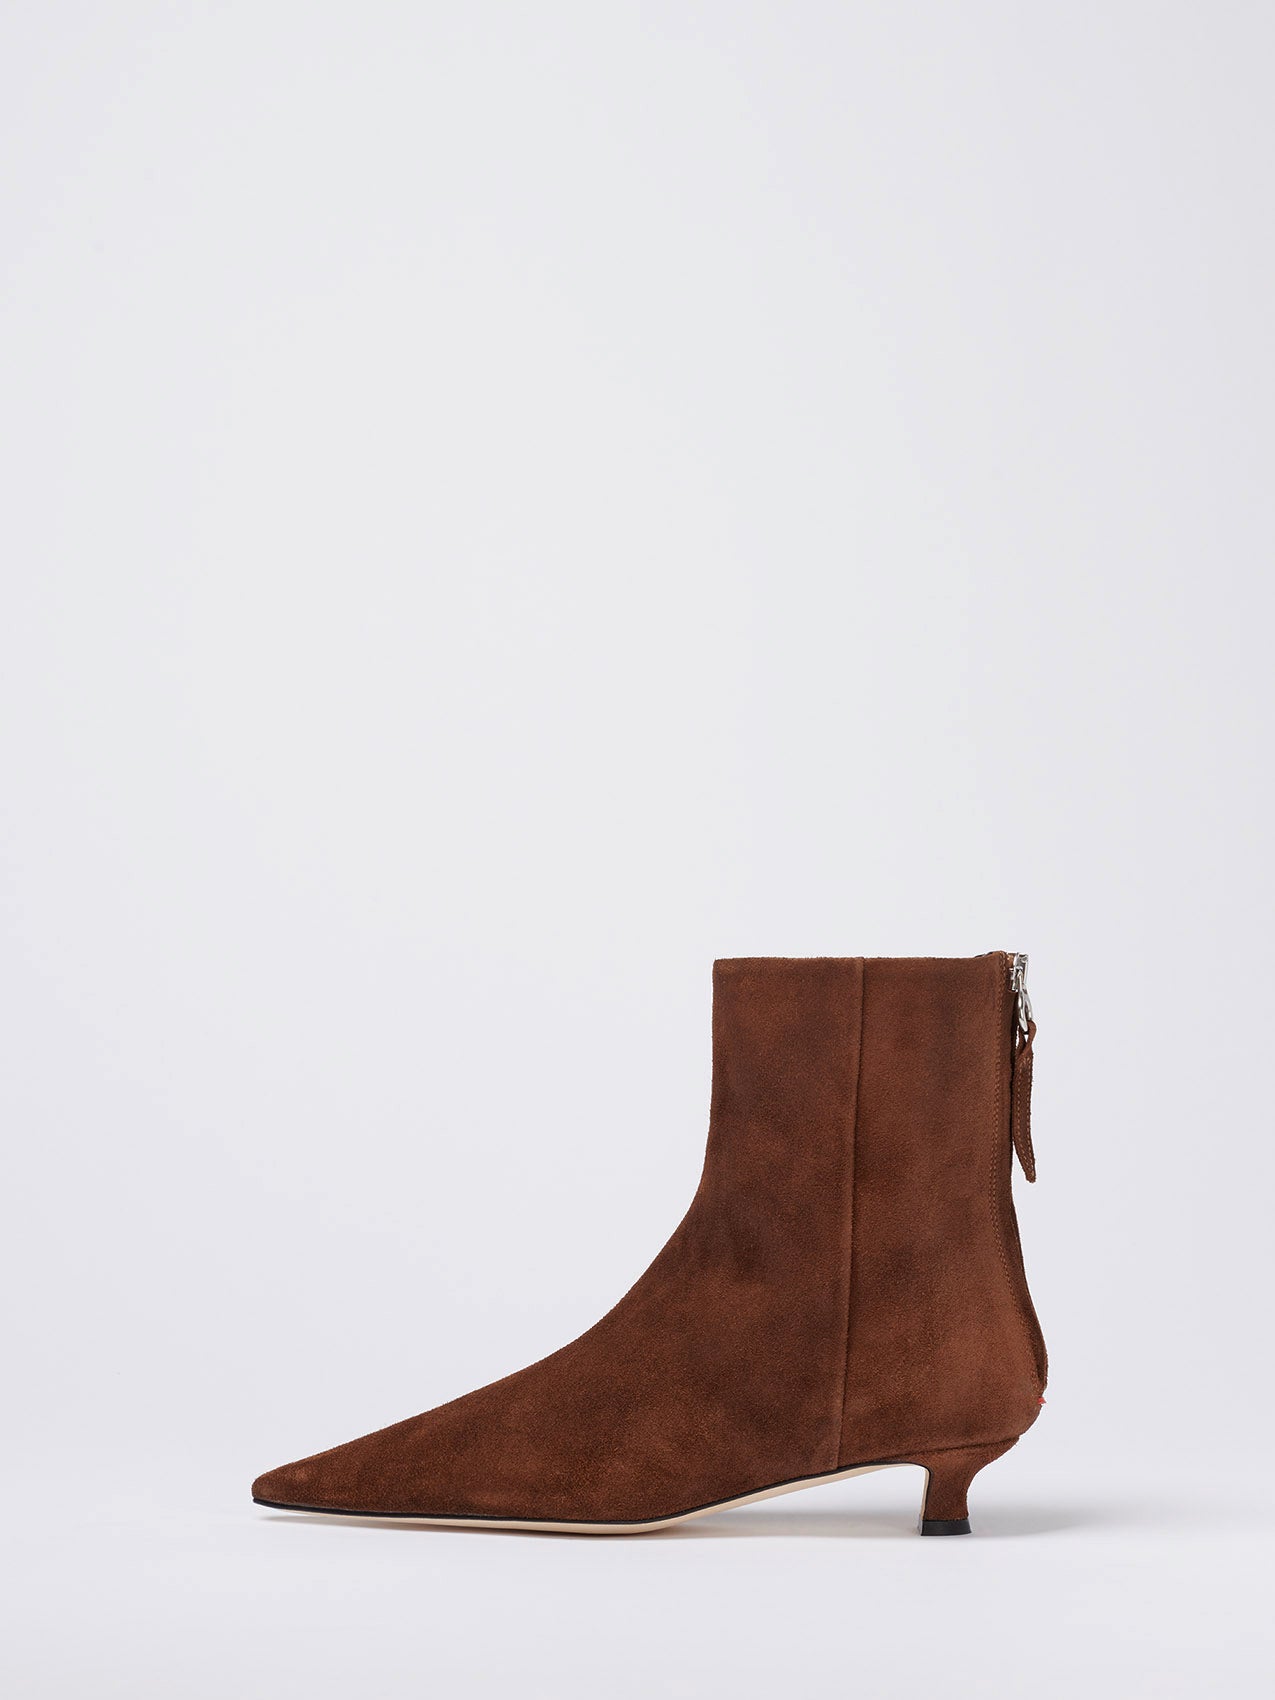 https://cdn.shopify.com/s/files/1/0683/8135/files/AEYDE-ZOE-COW-SUEDE-LEATHER-BROWN.jpg?v=1687445059